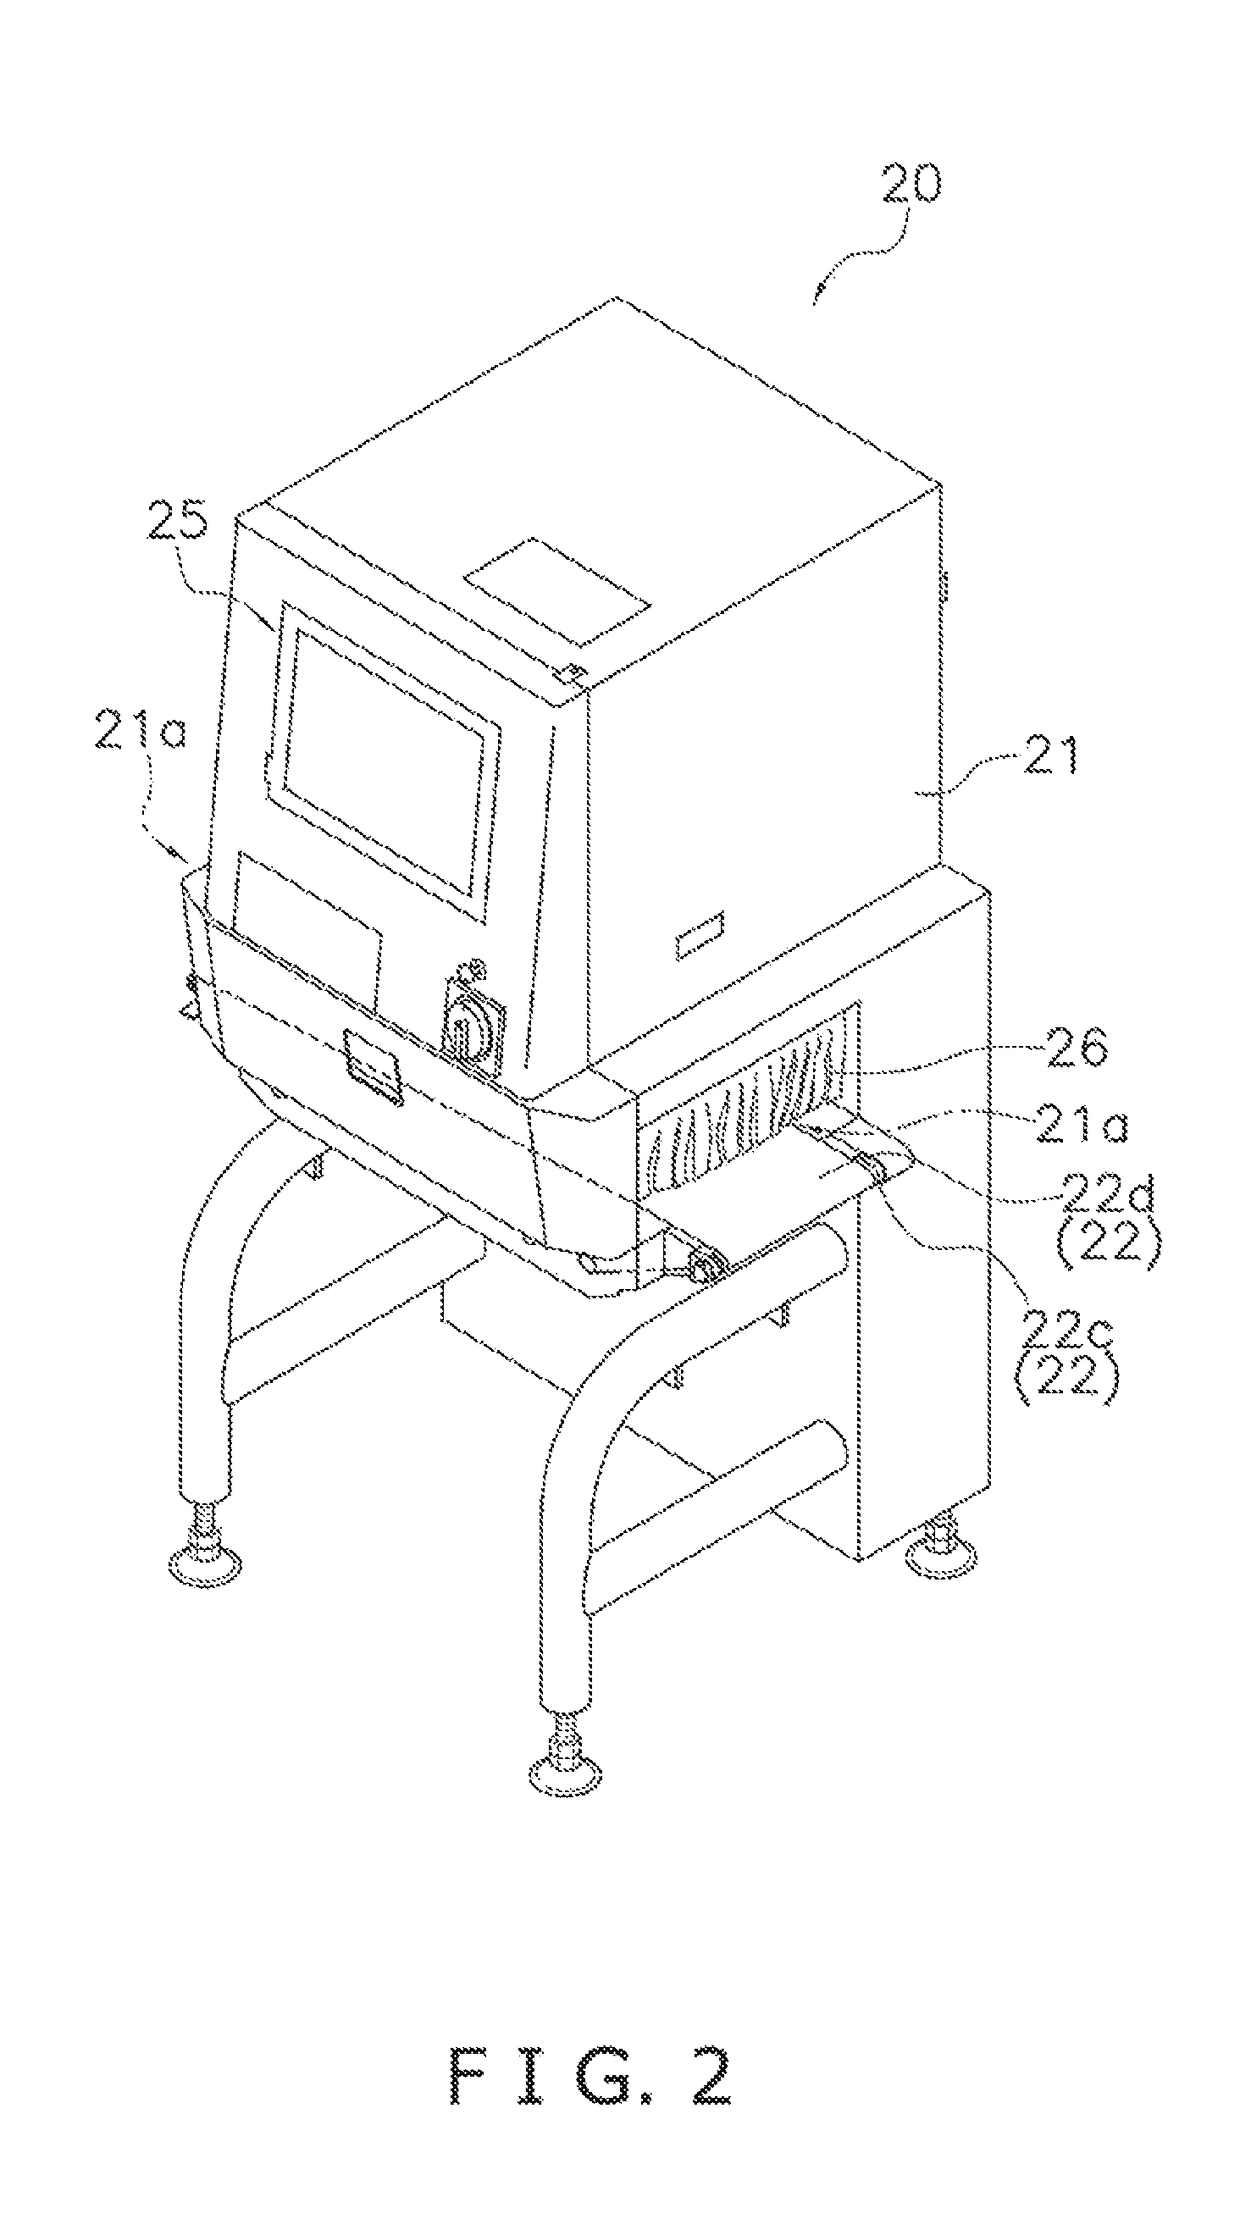 X-ray generator and X-ray inspection apparatus